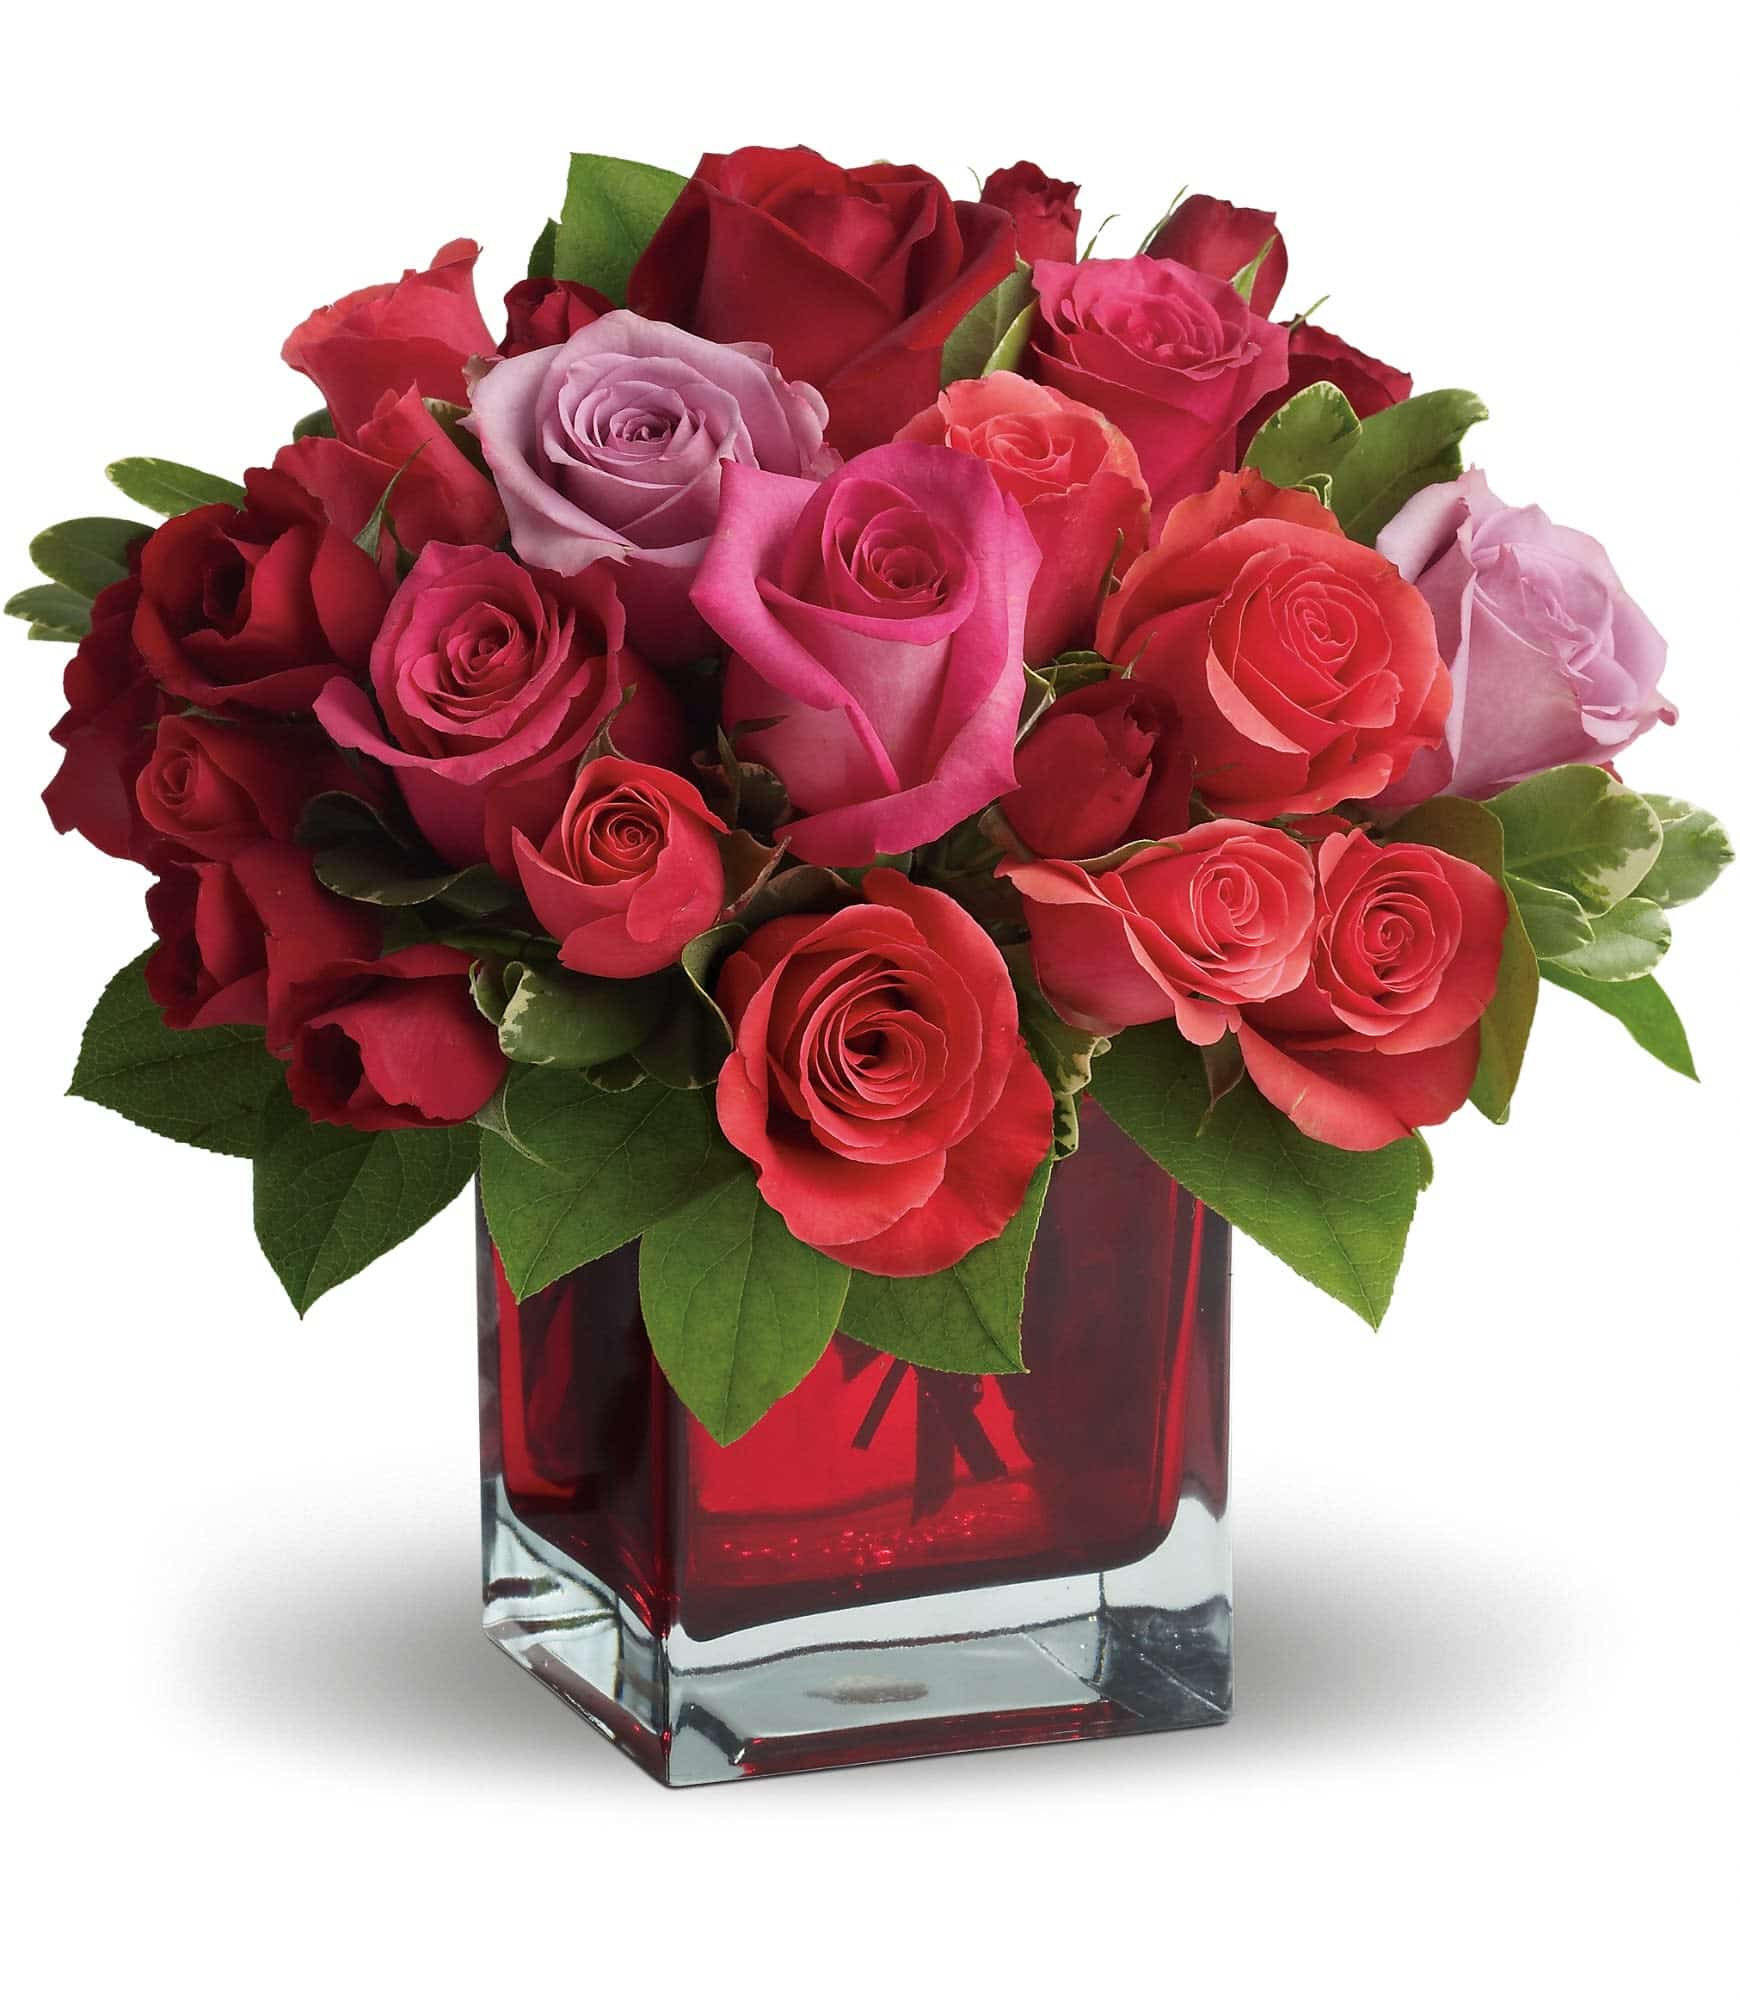 red roses in a small vase